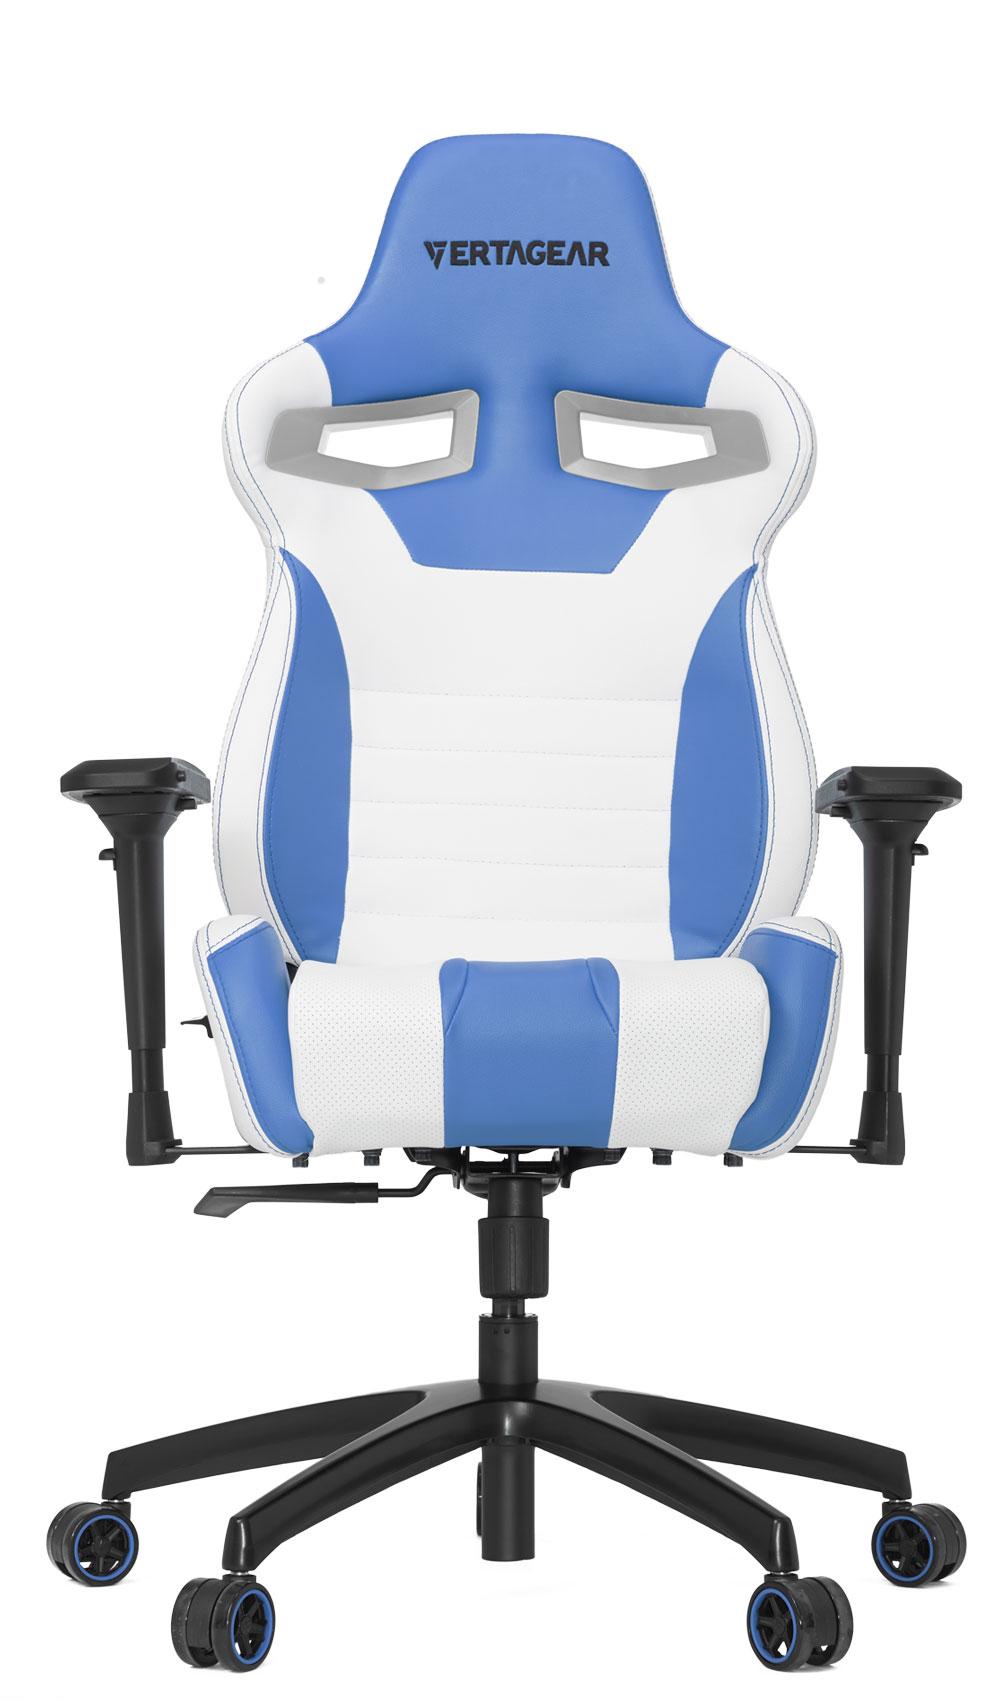 vertagear-racing-series-sl4000-white-and-blue-gaming-chair-1000px-v10002.jpg